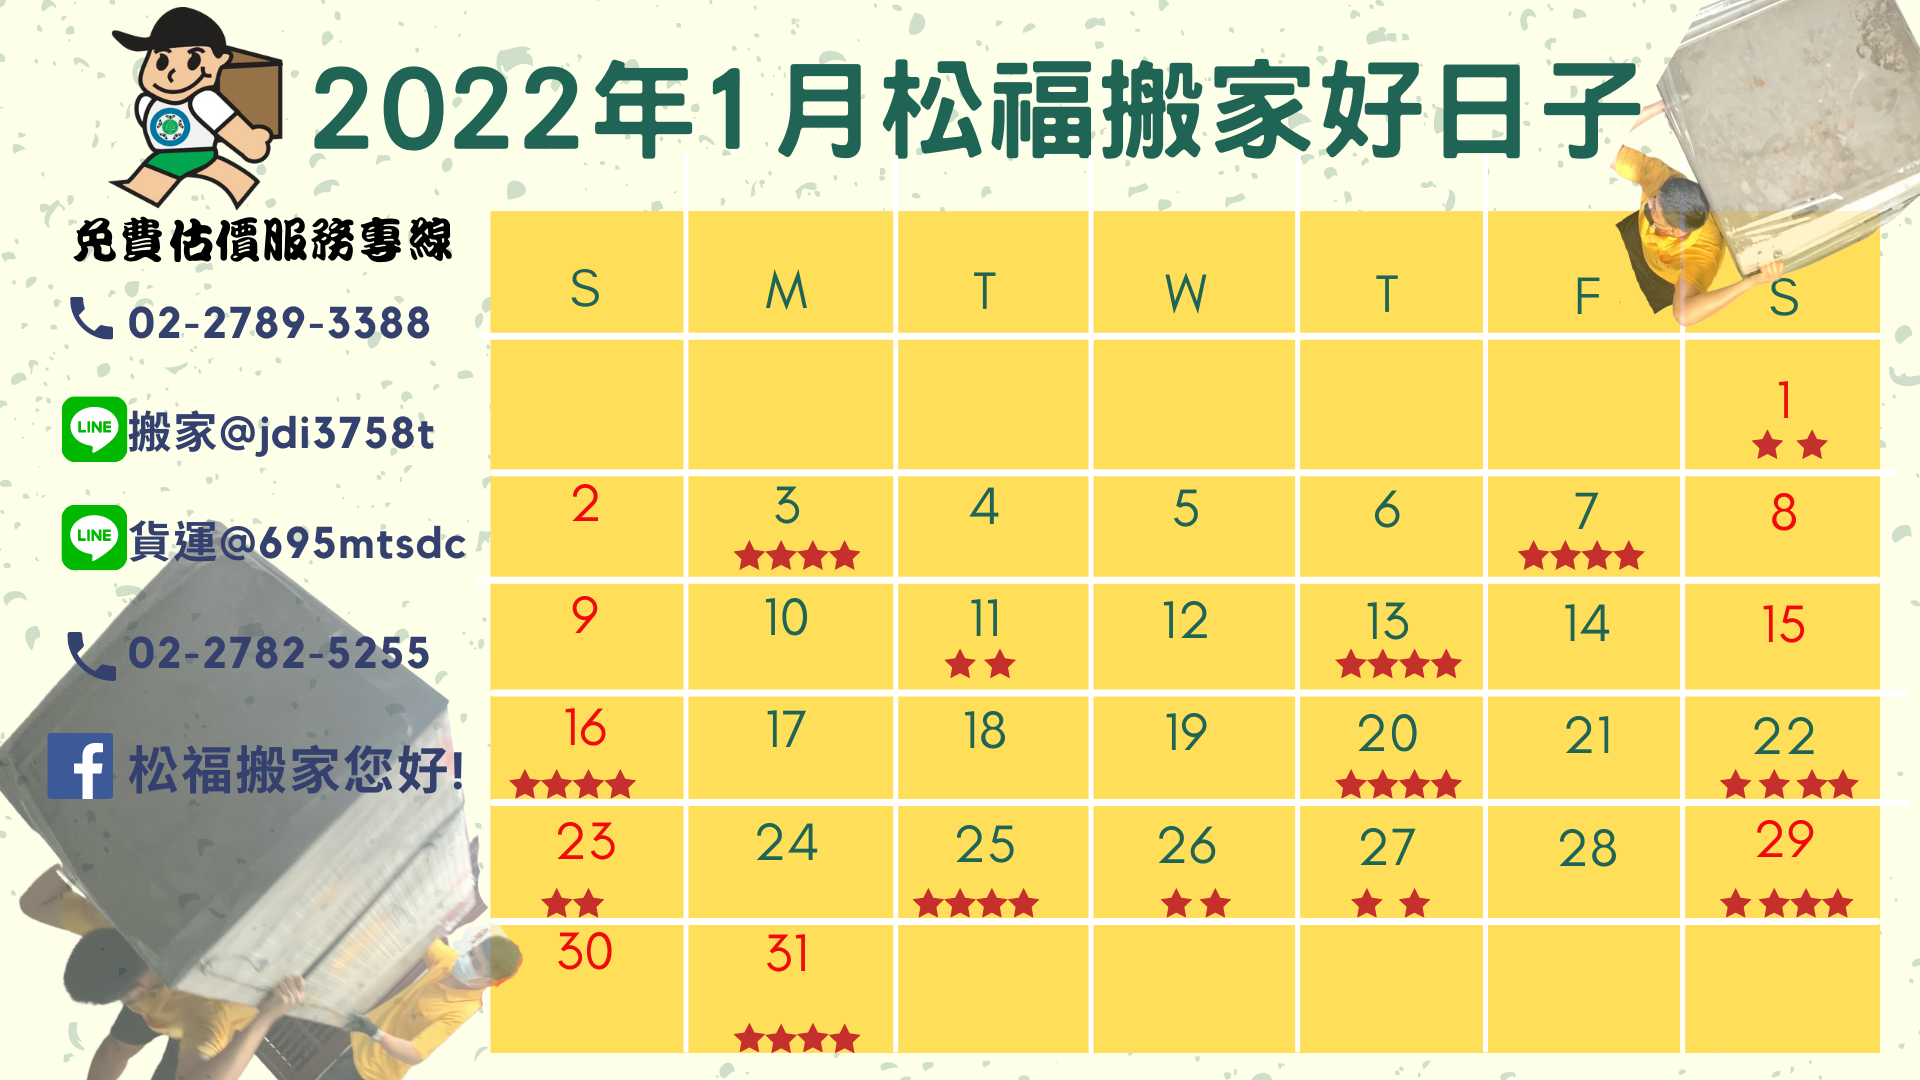 “A good day to move in January 2022” Please find Songfu moving company, recommend Taipei moving, company moving, exquisite moving, hands-free packing and moving recommended high-quality first choice!